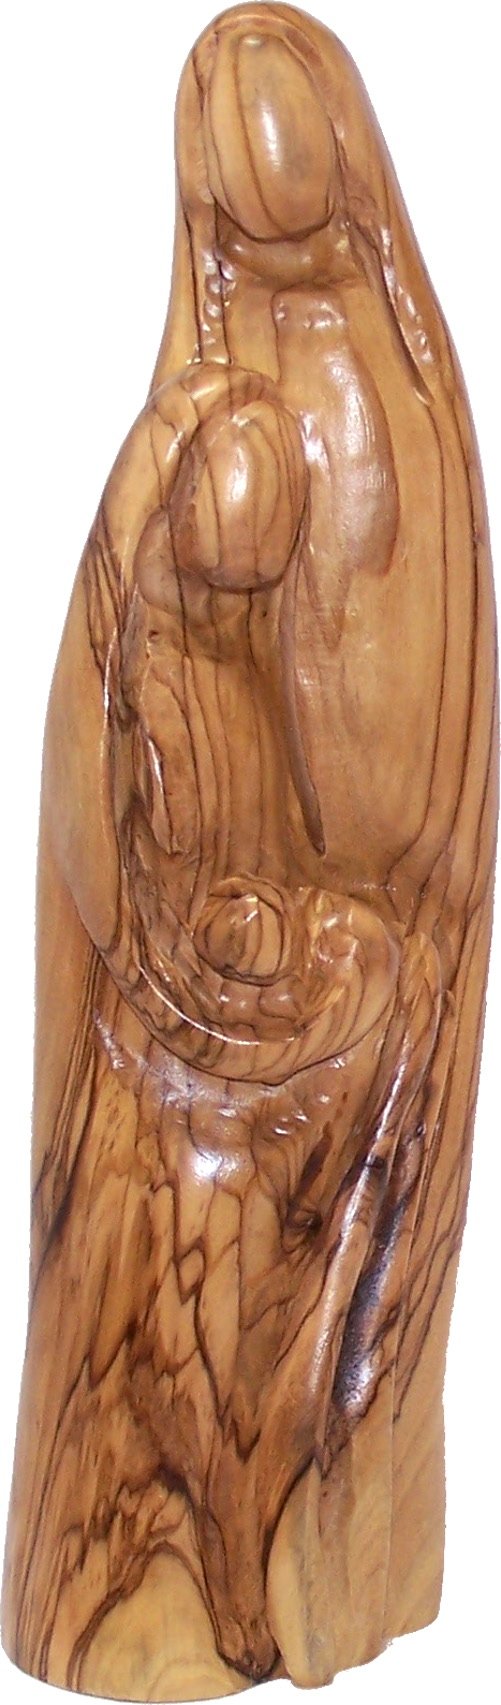 Holy Land Market Olive Wood Holy Family Statue (9.6 Inches)